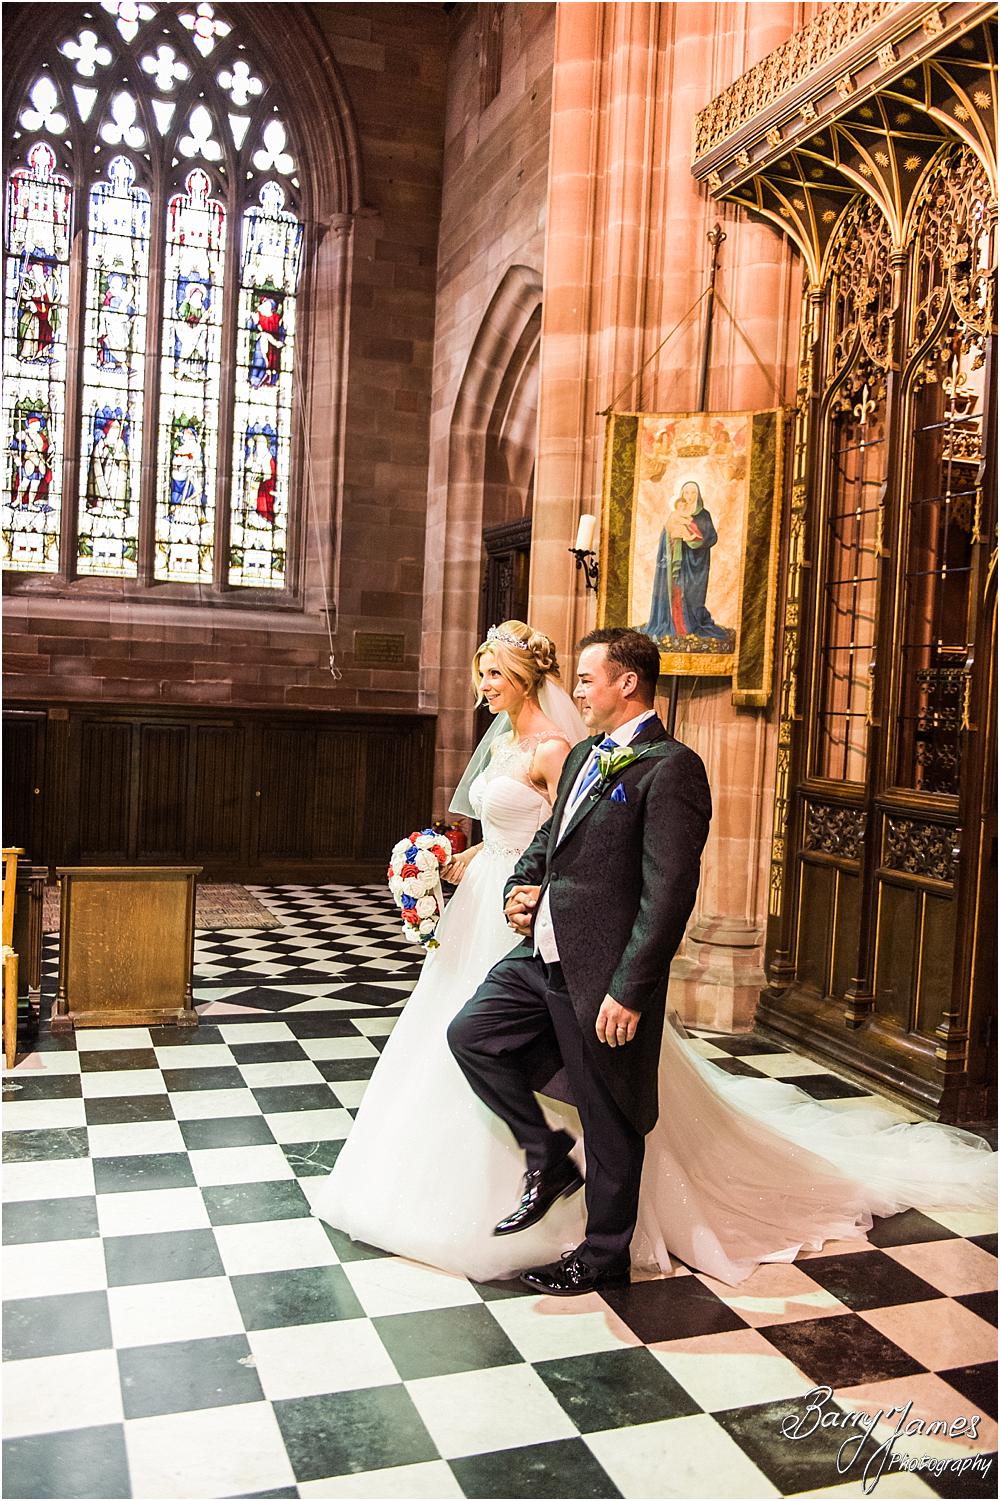 Unobtrusive photographs capturing the wonderful ceremony at Holy Angels at Hoar Cross Hall in Staffordshire by Stafford Wedding Photographer Barry James